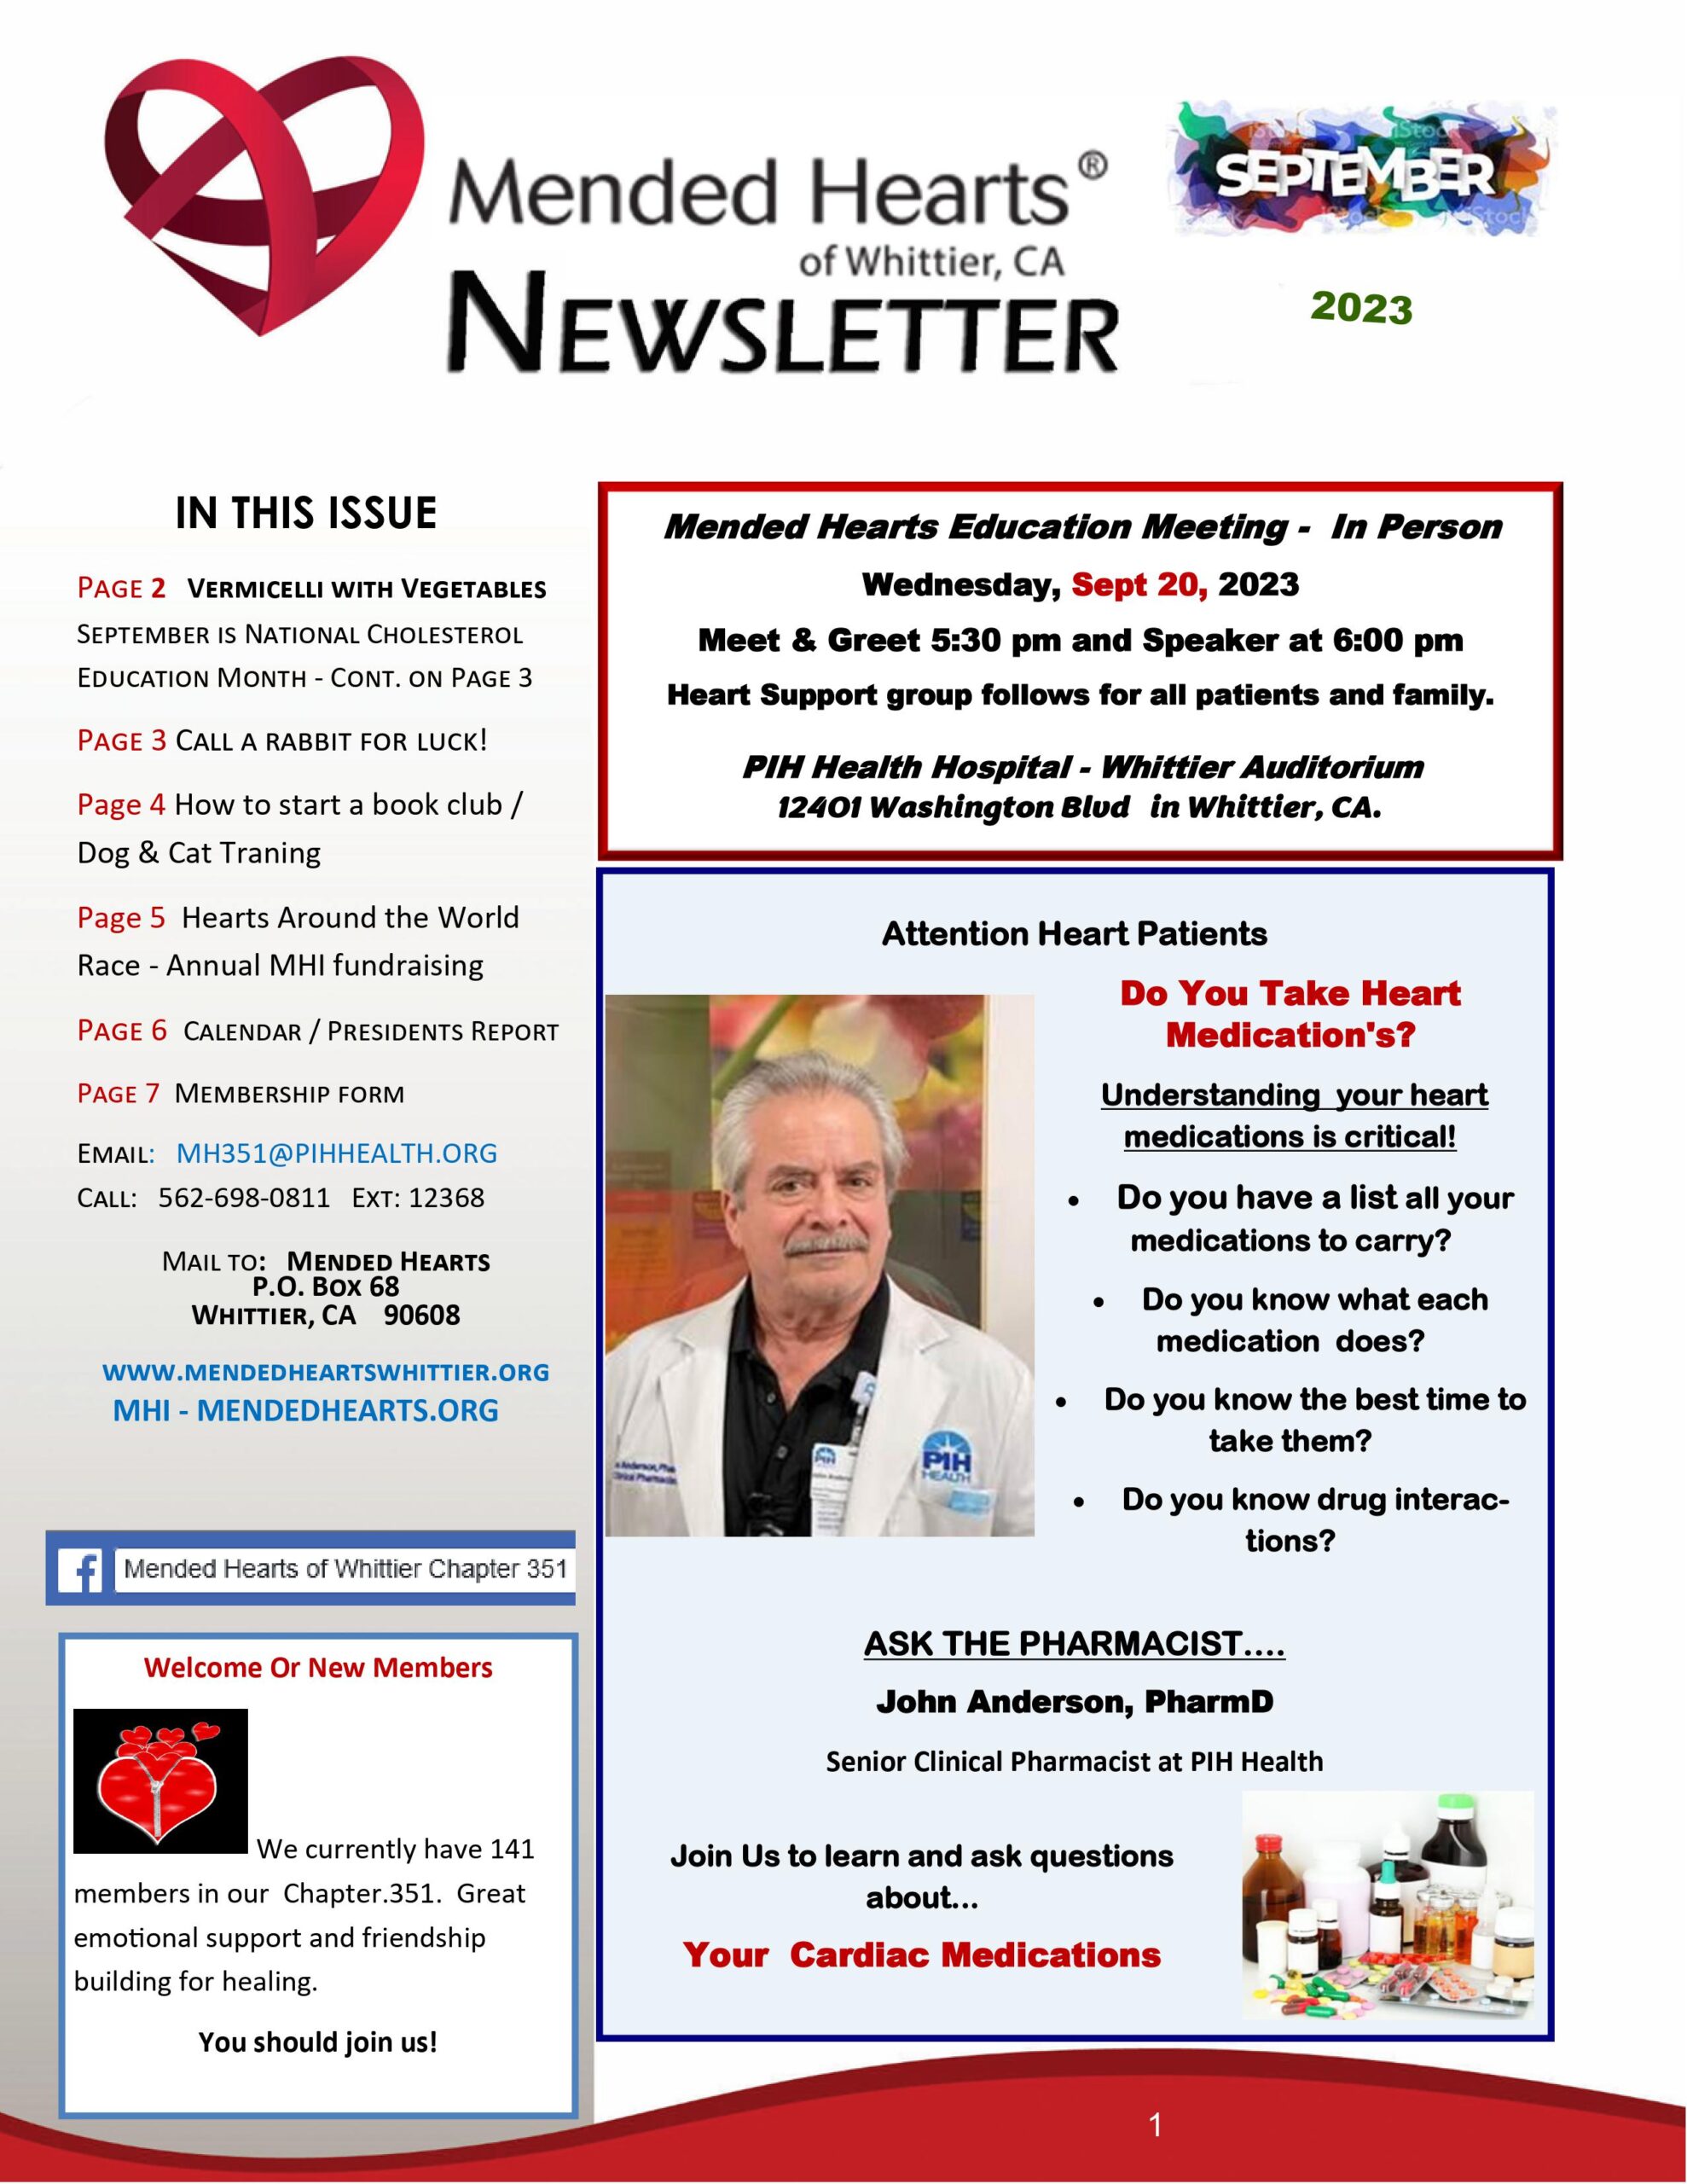 Mended Hearts Whittier May 2023 Newsletter